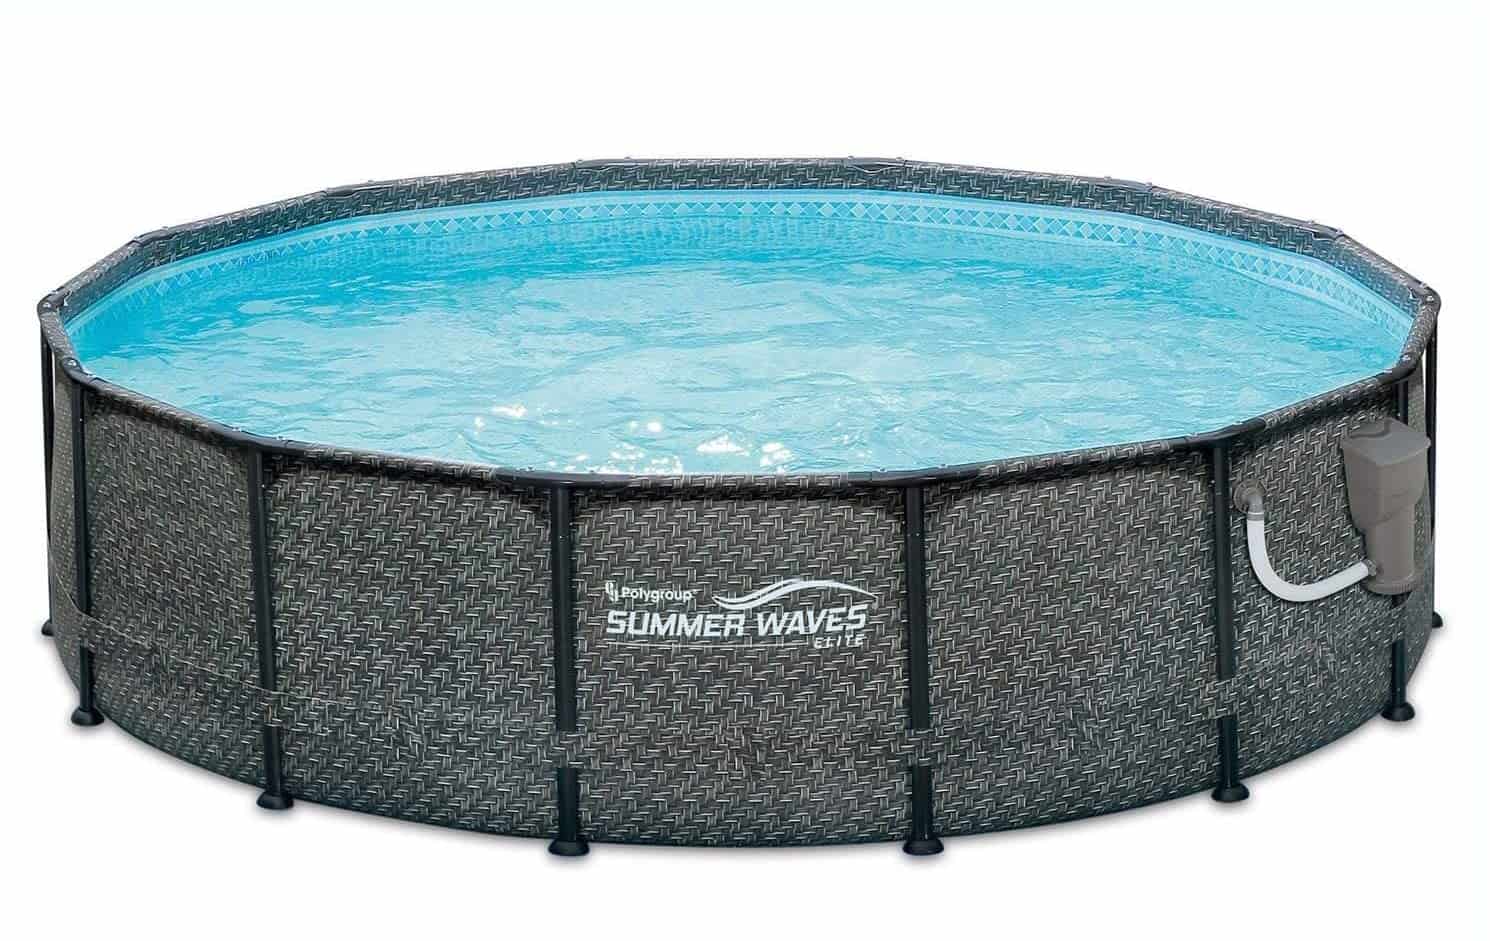 14 foot round pool